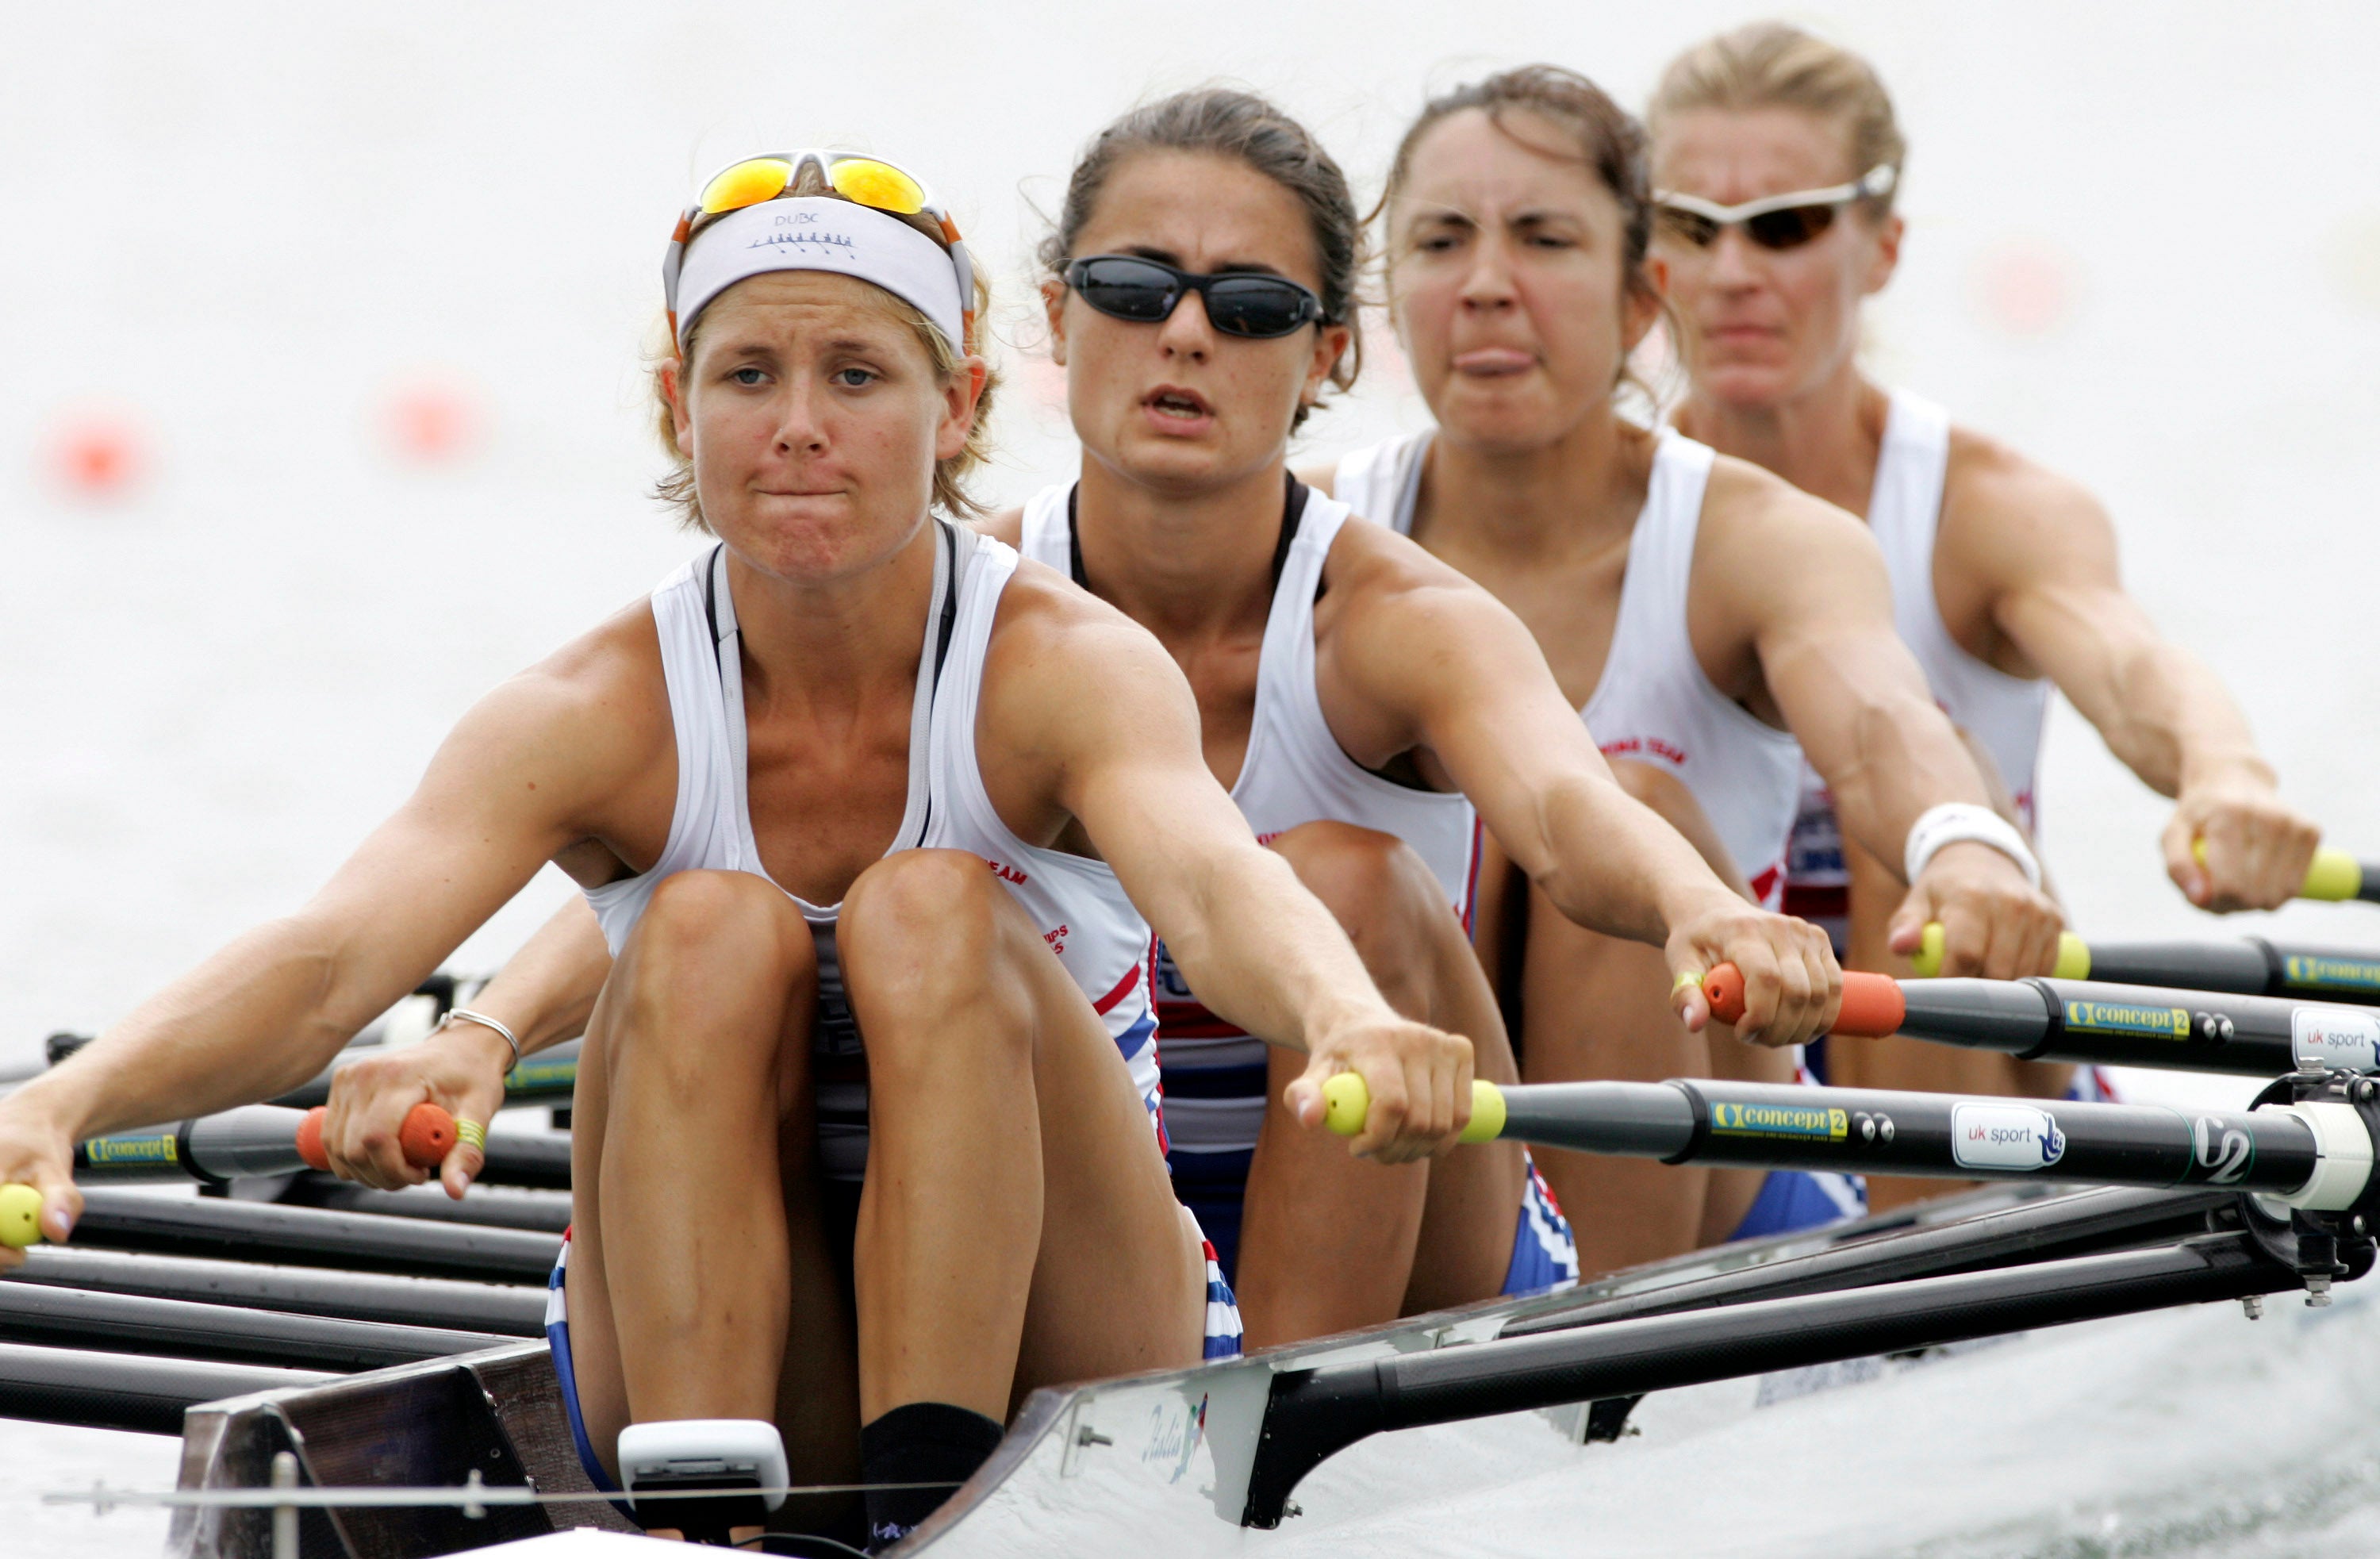 Tanya Brady (L) rowed for the British Army and became a member of Team GB in 2005